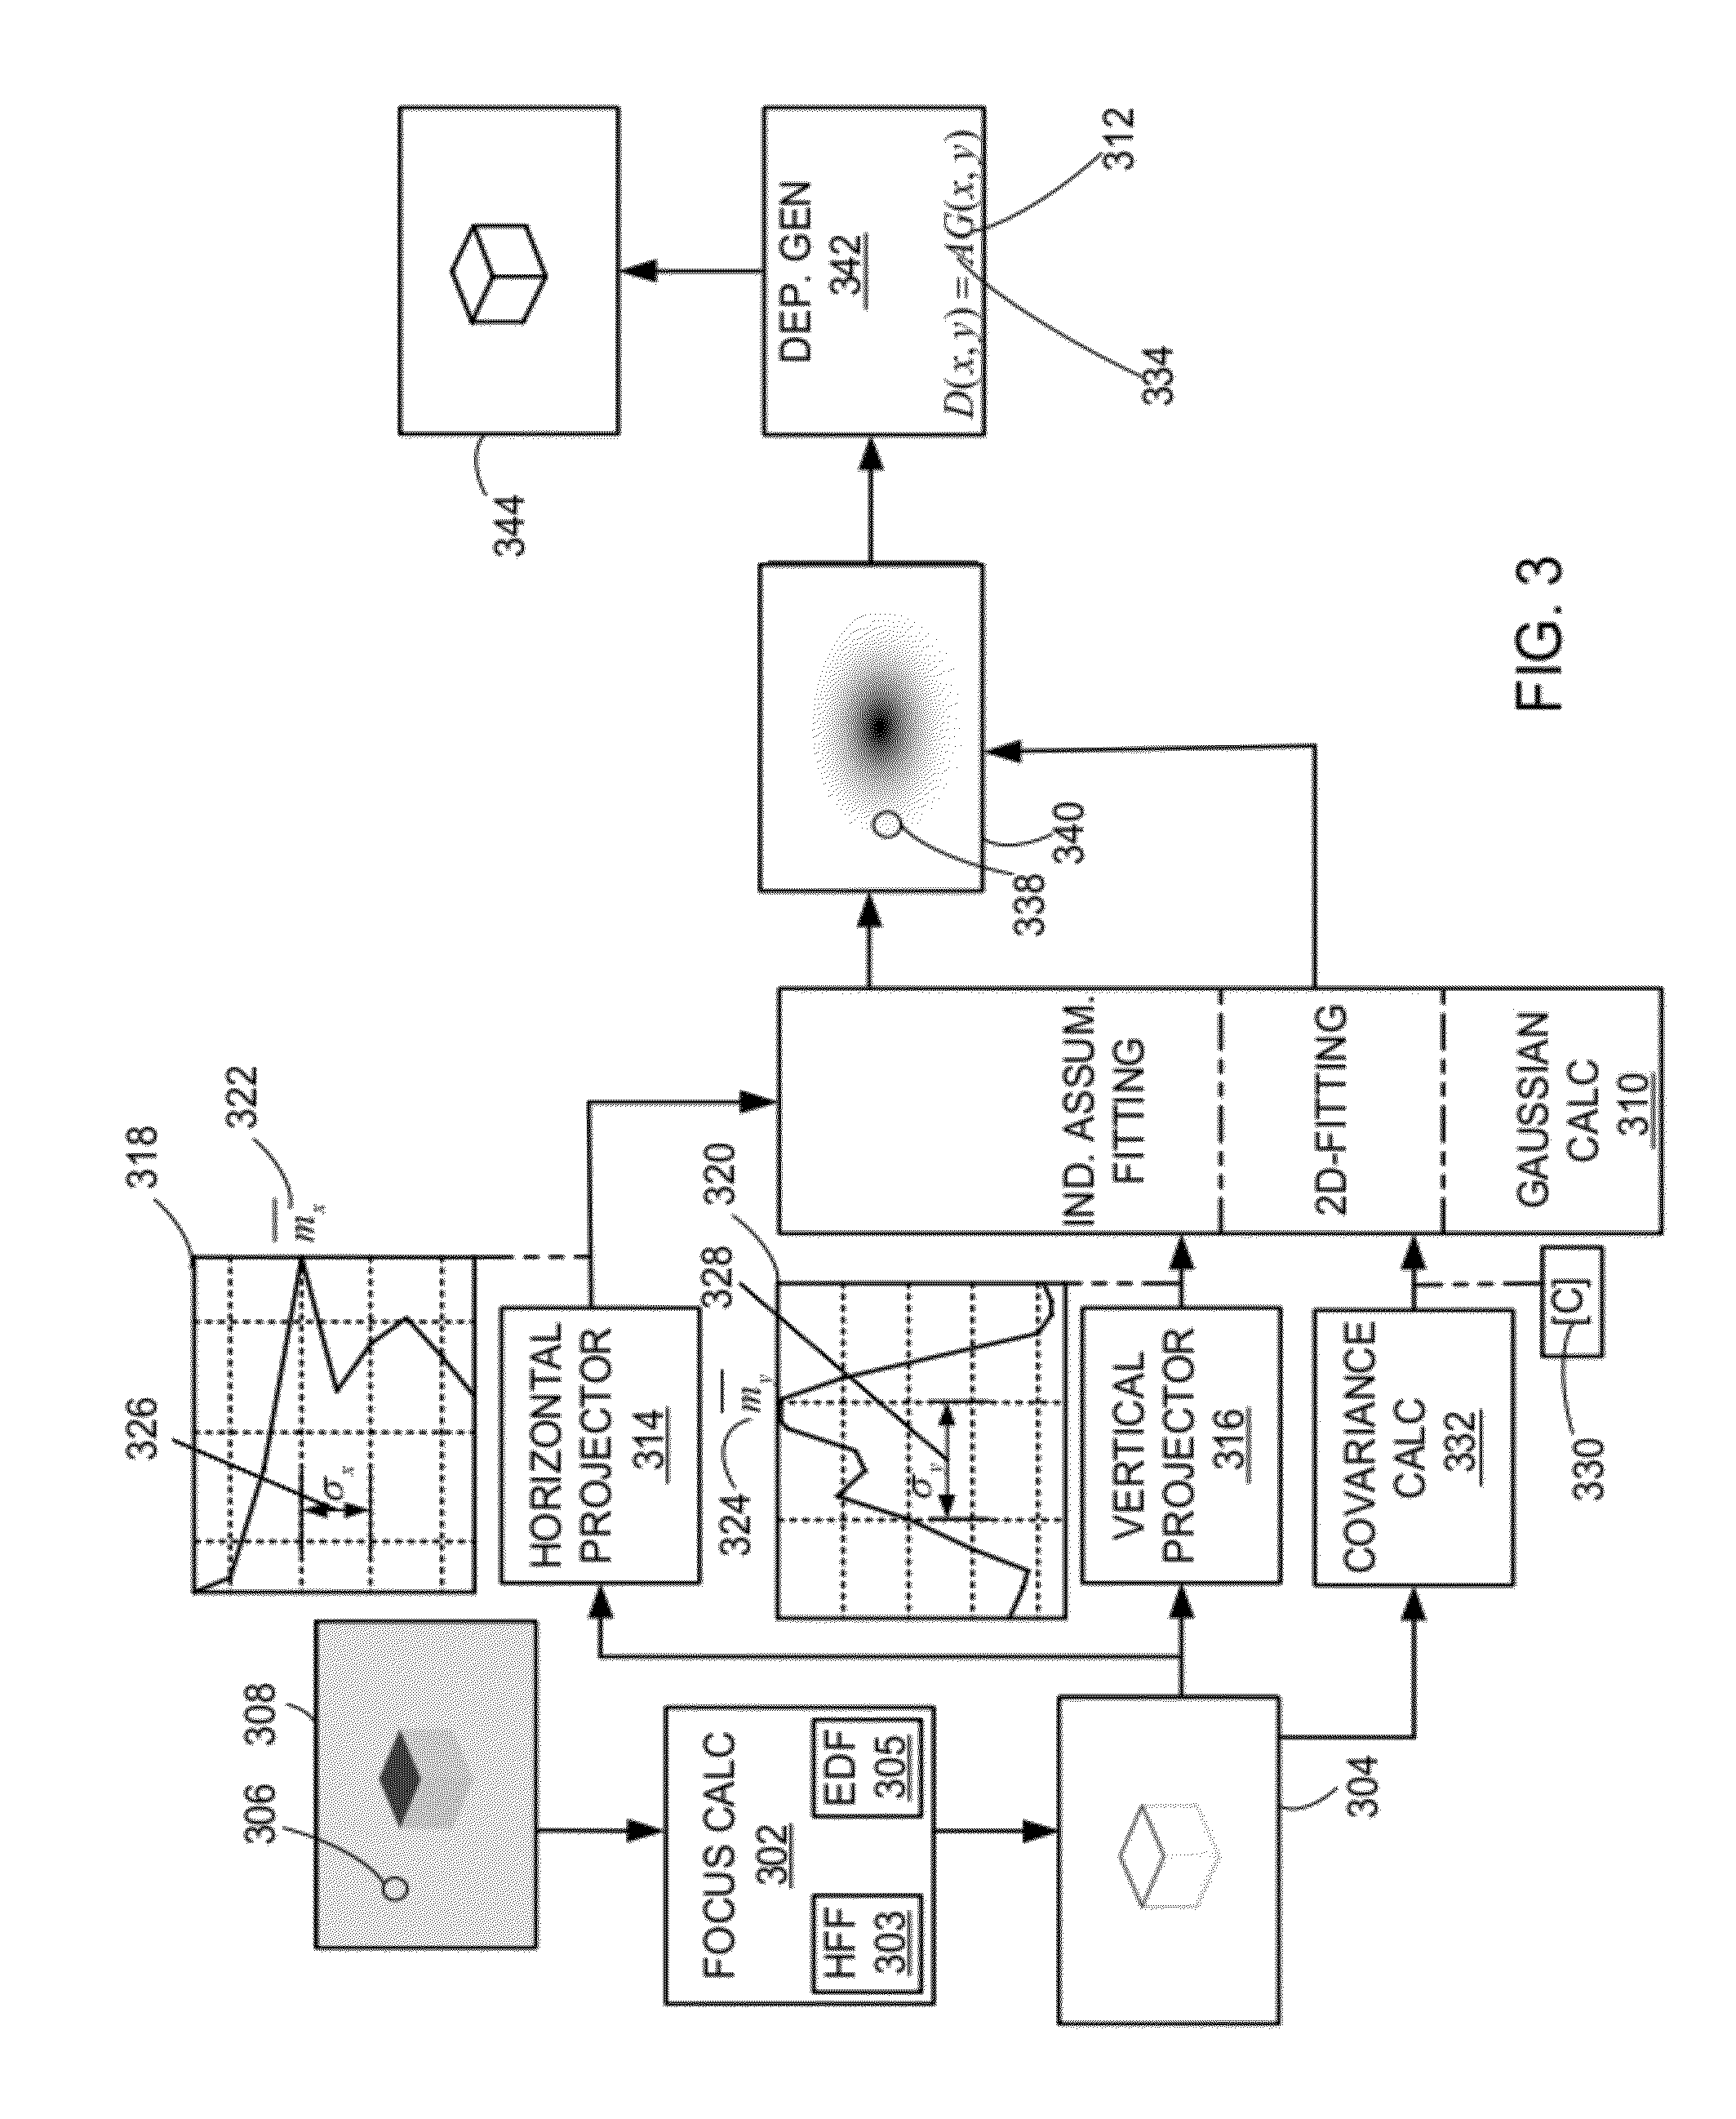 Depth estimation system for two-dimensional images and method of operation thereof